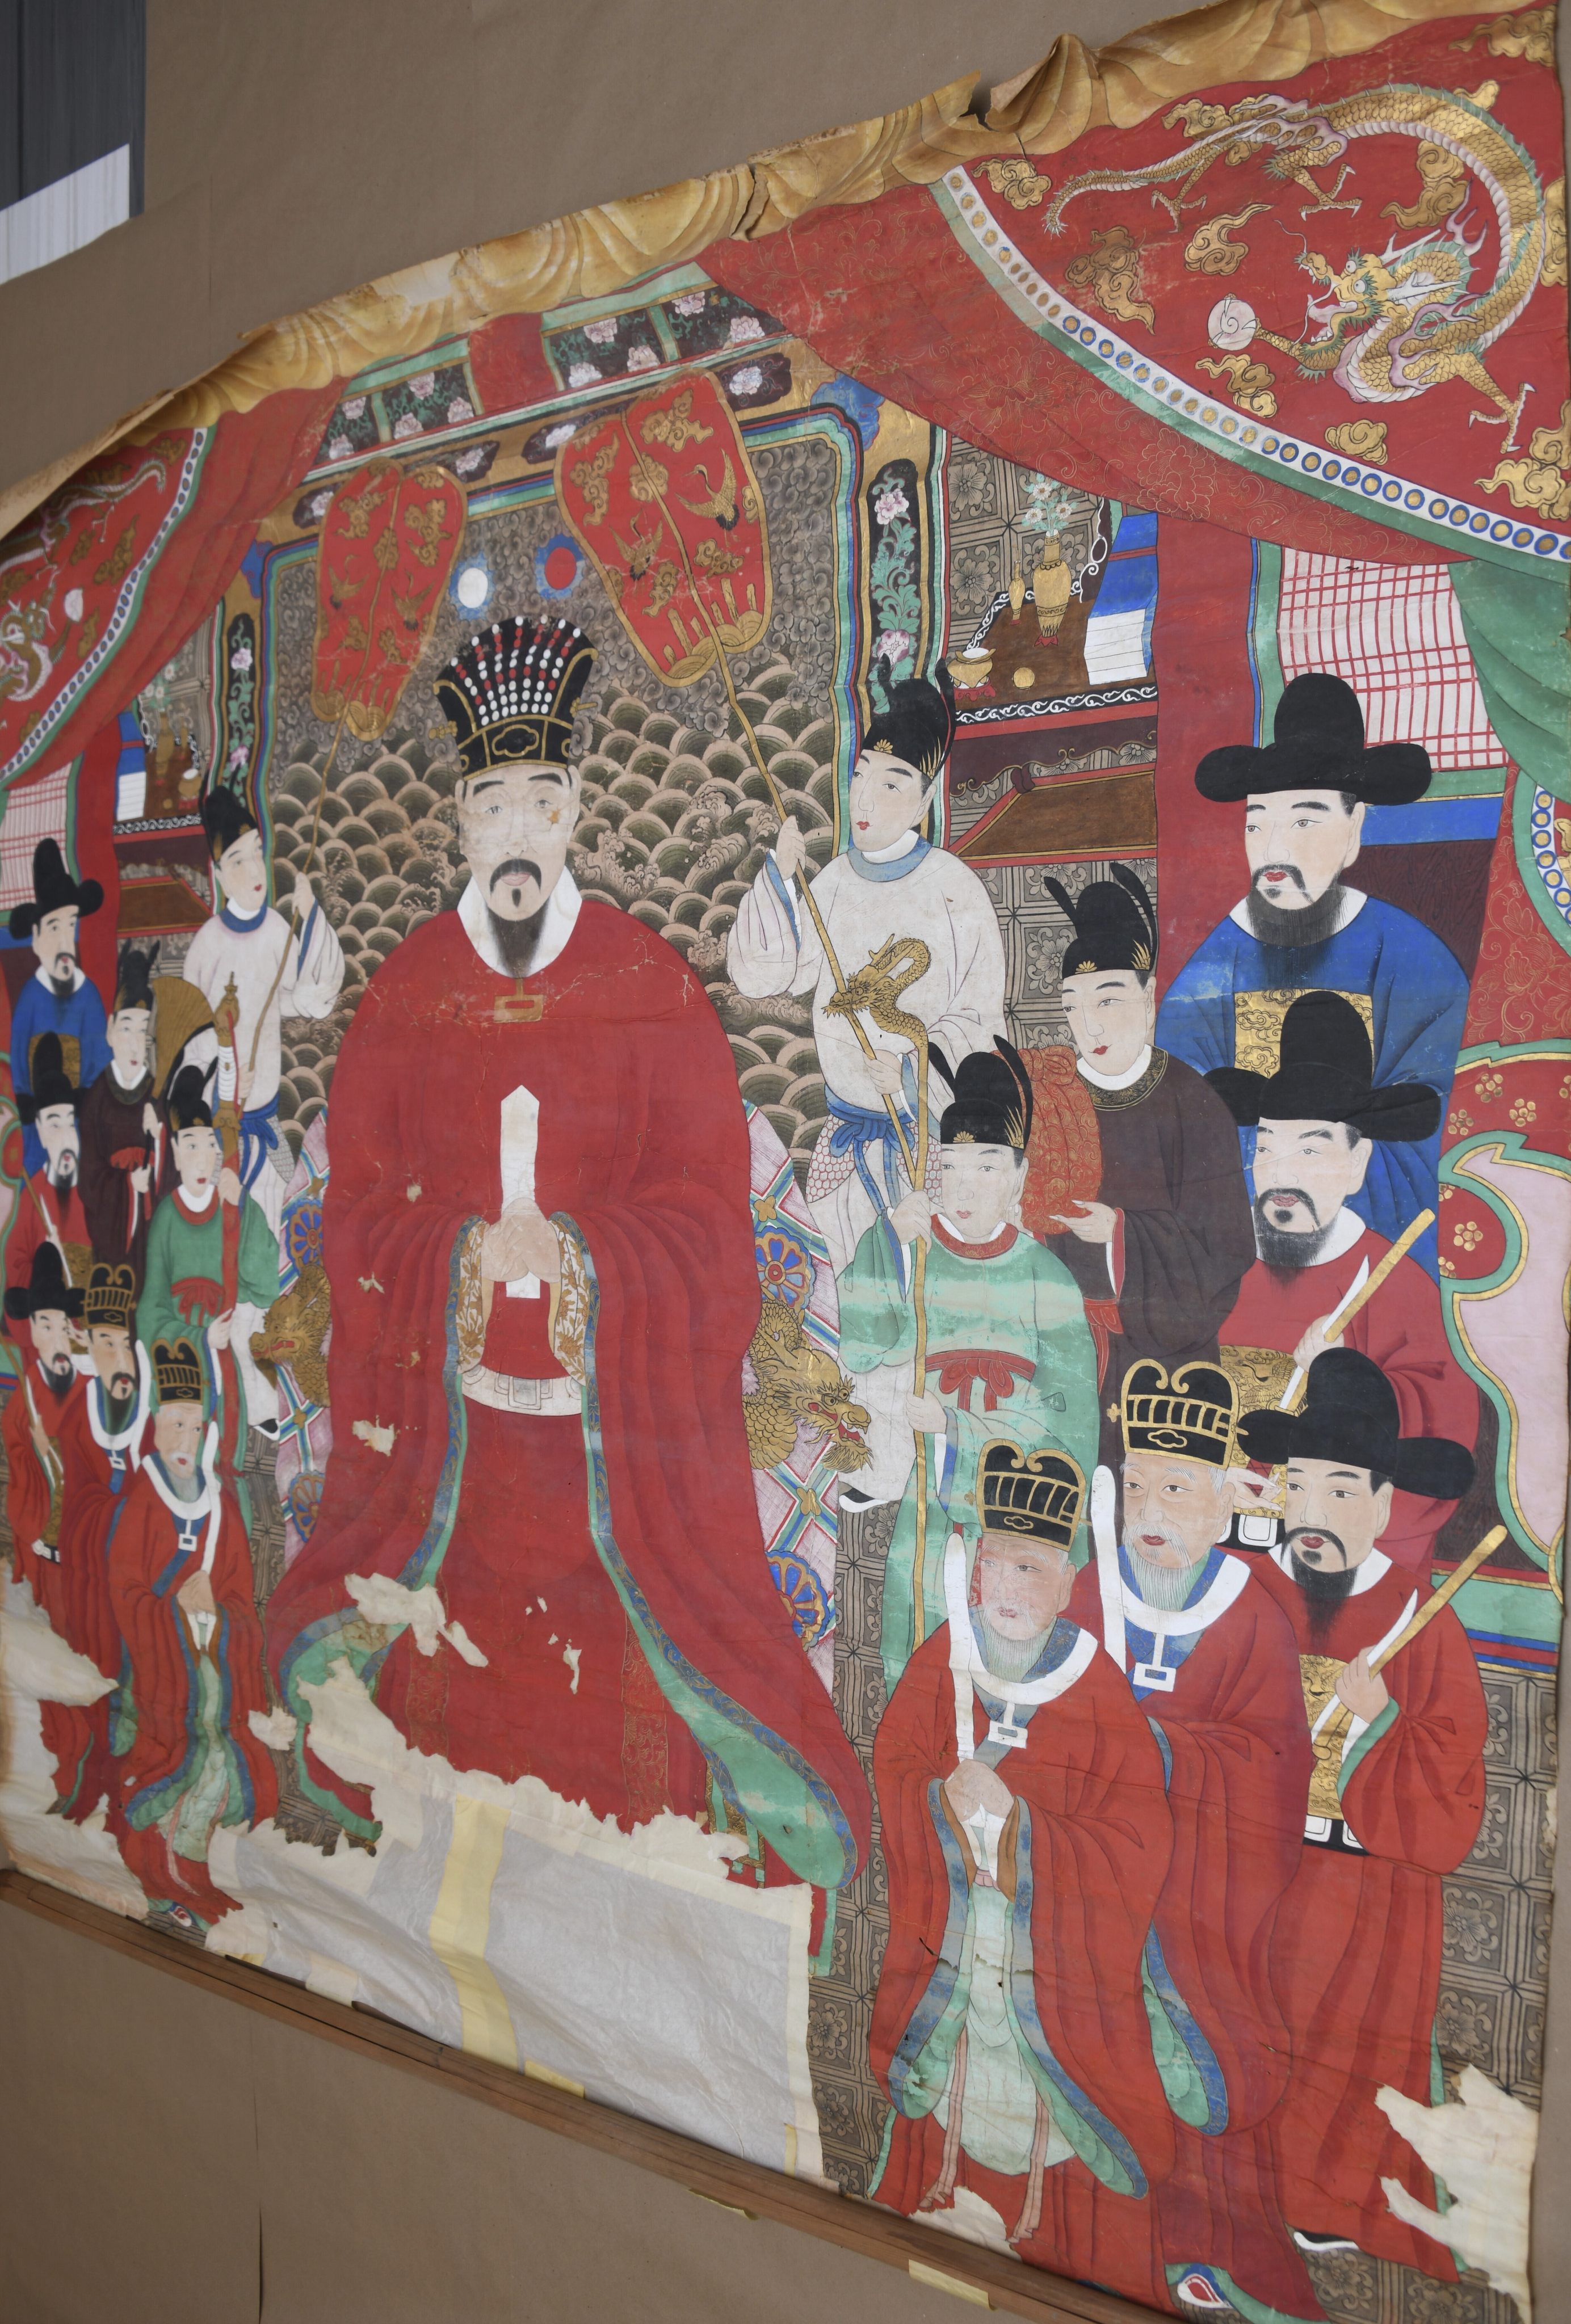 This tapestry is one of 22 historic artifacts that were looted following the Battle of Okinawa in WWII. Photo: FBI via AP